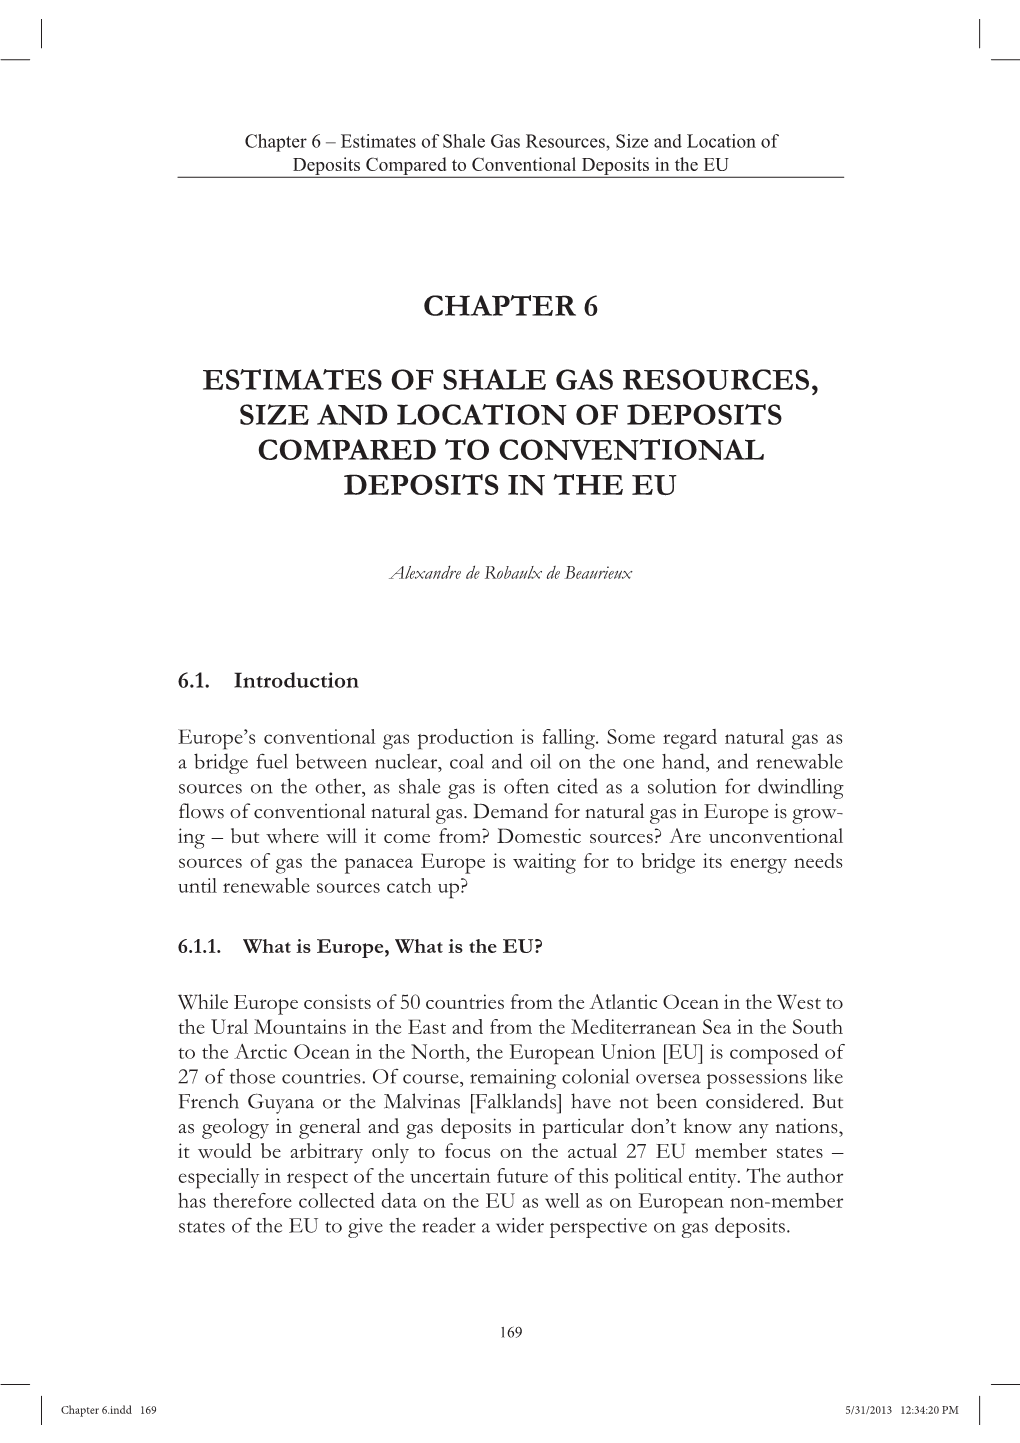 Chapter 6 Estimates of Shale Gas Resources, Size And